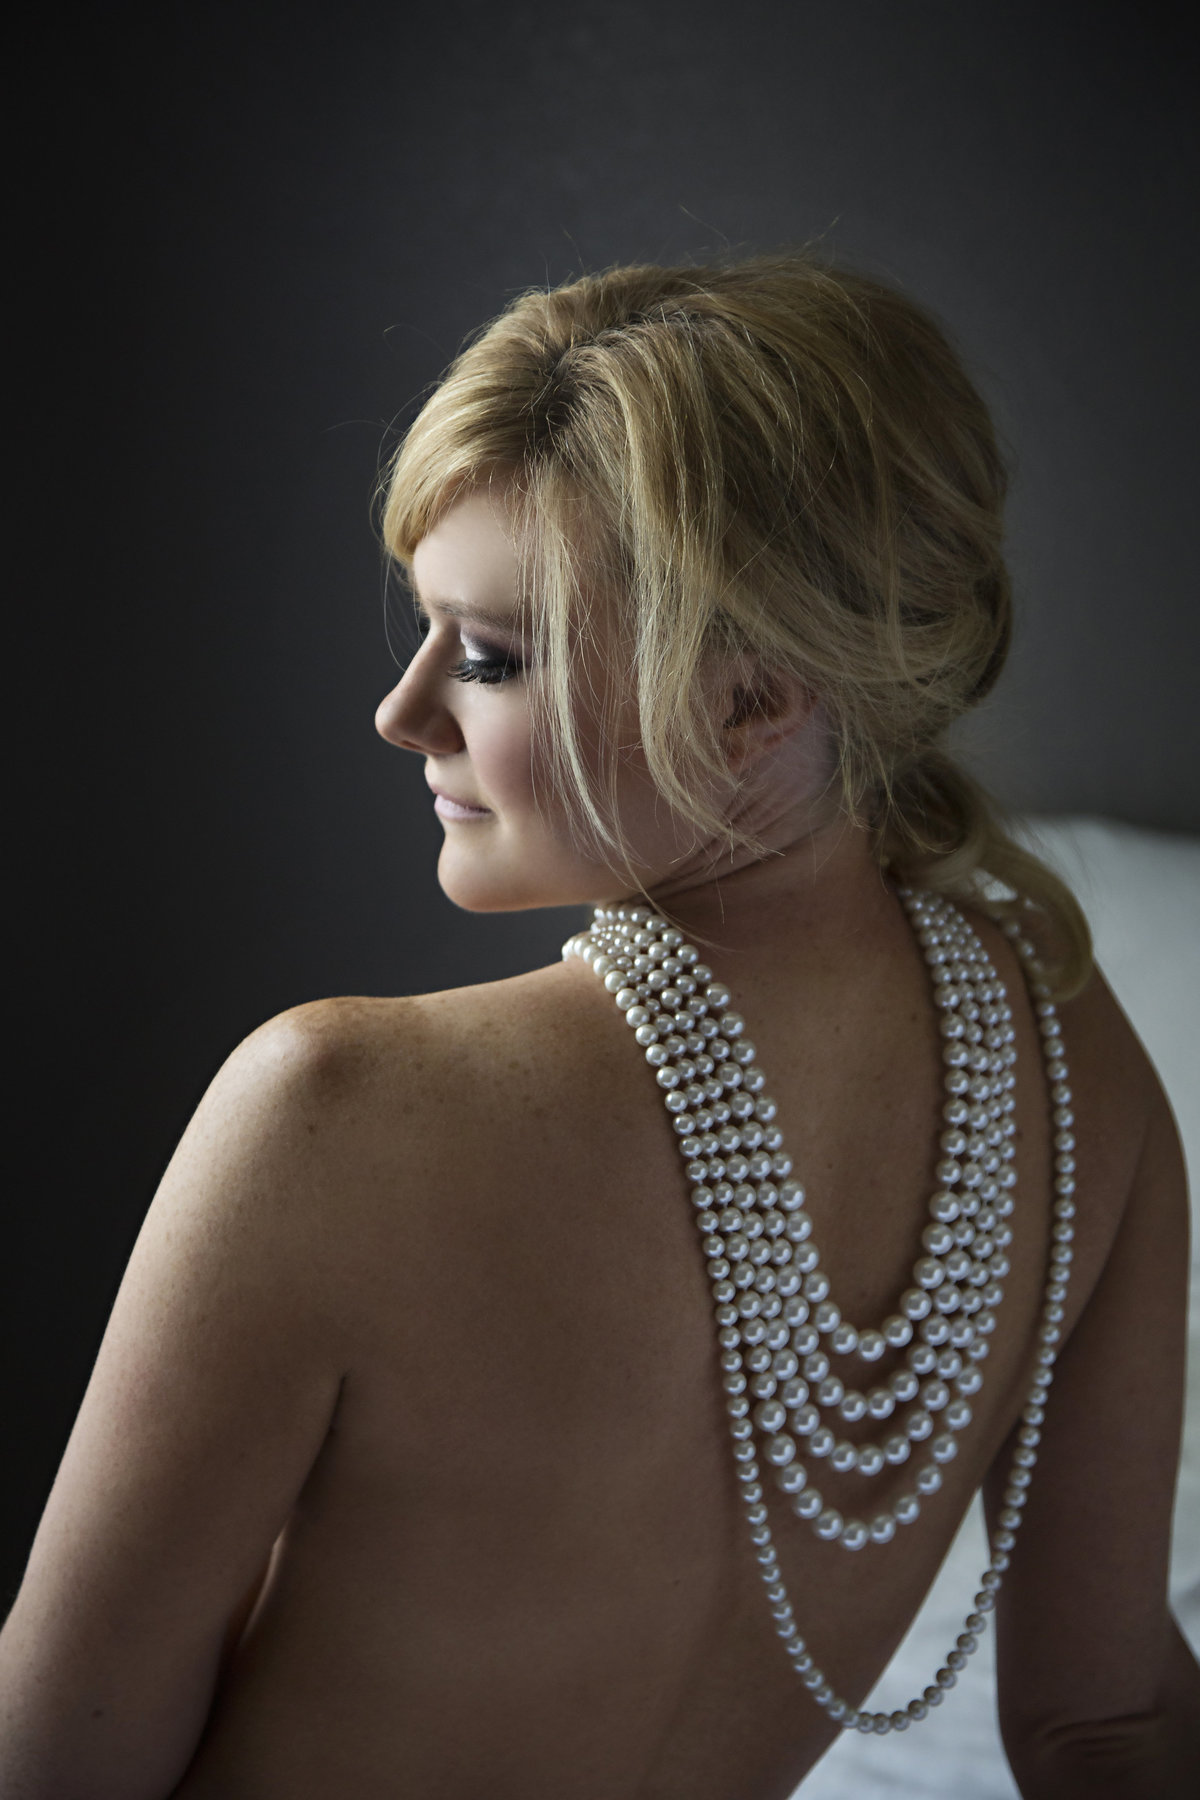 Pretty blonde lady with pearls  and a bare back